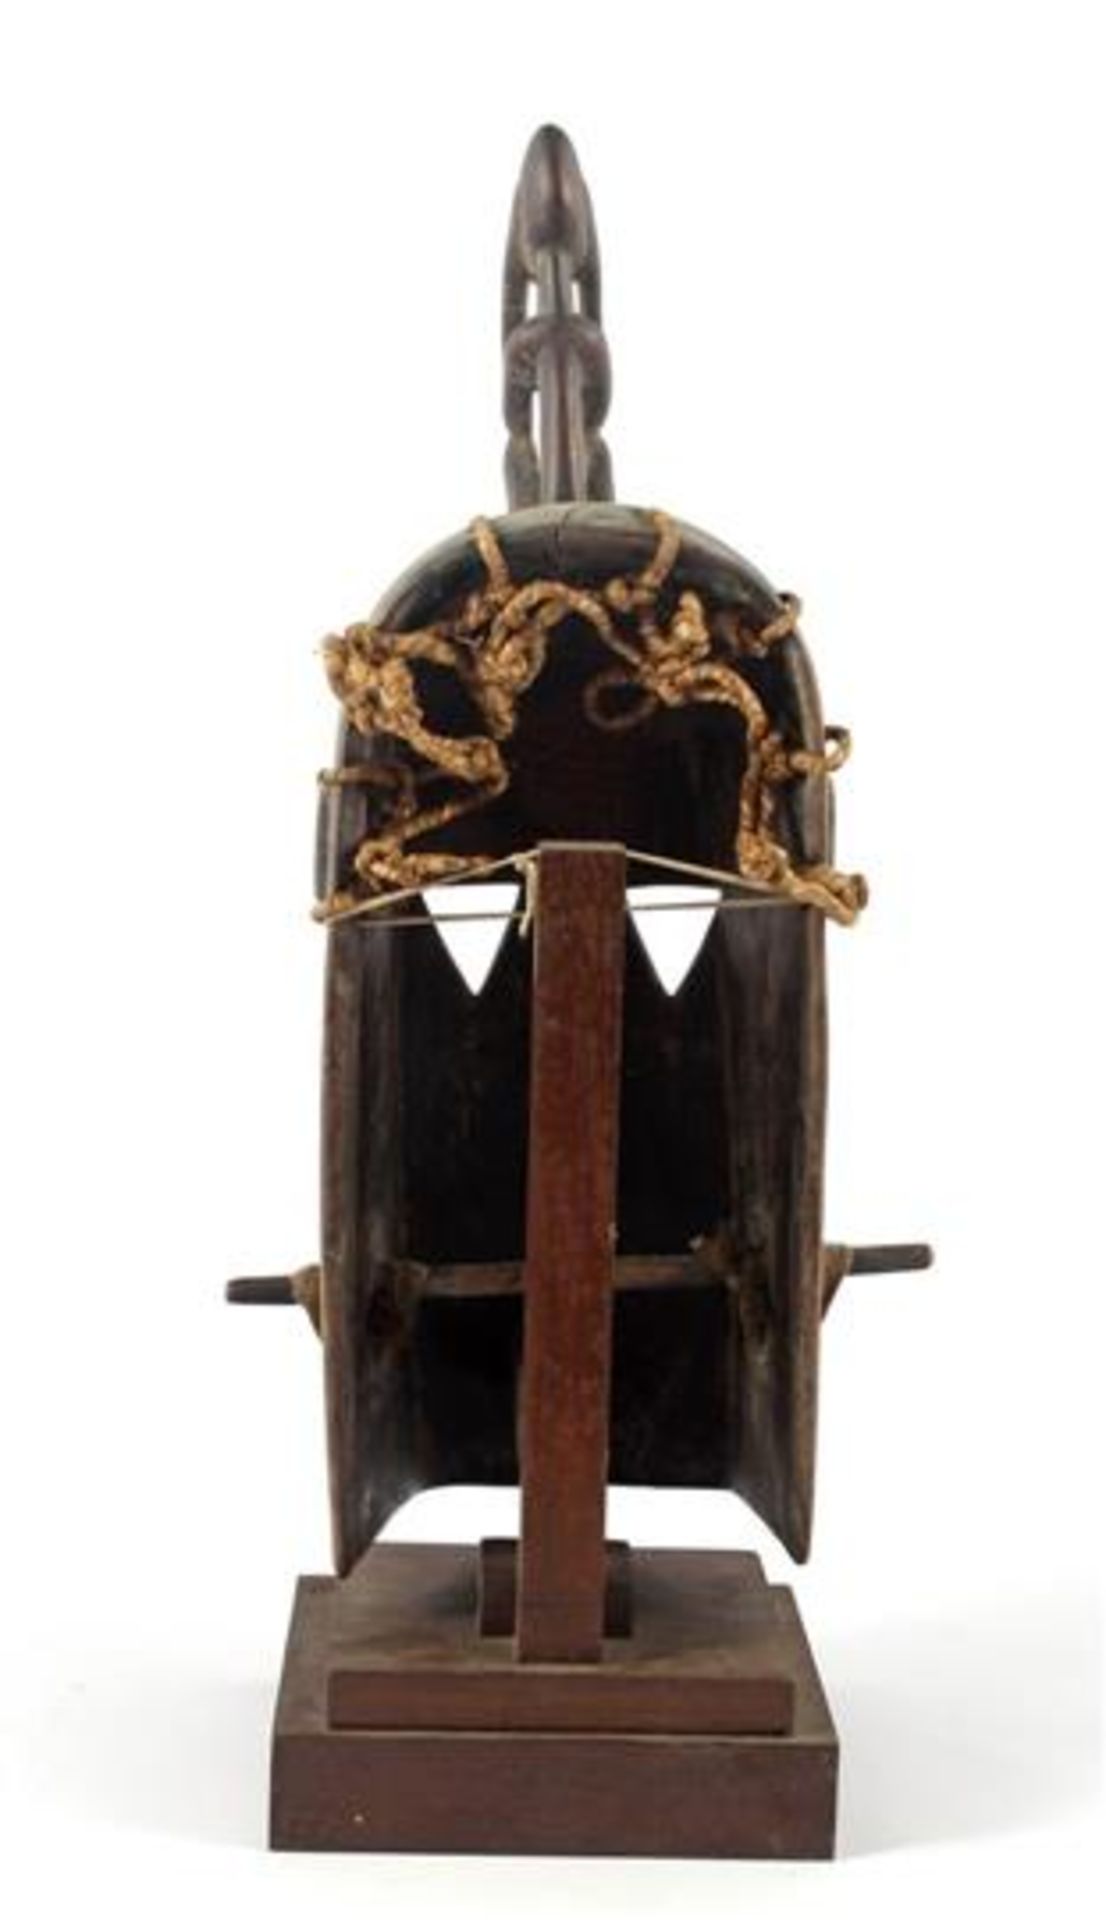 Wooden masked Dogon Mali mask, from before 1950, 47.5 cm high, 23 cm wide, on wooden stand - Image 2 of 2